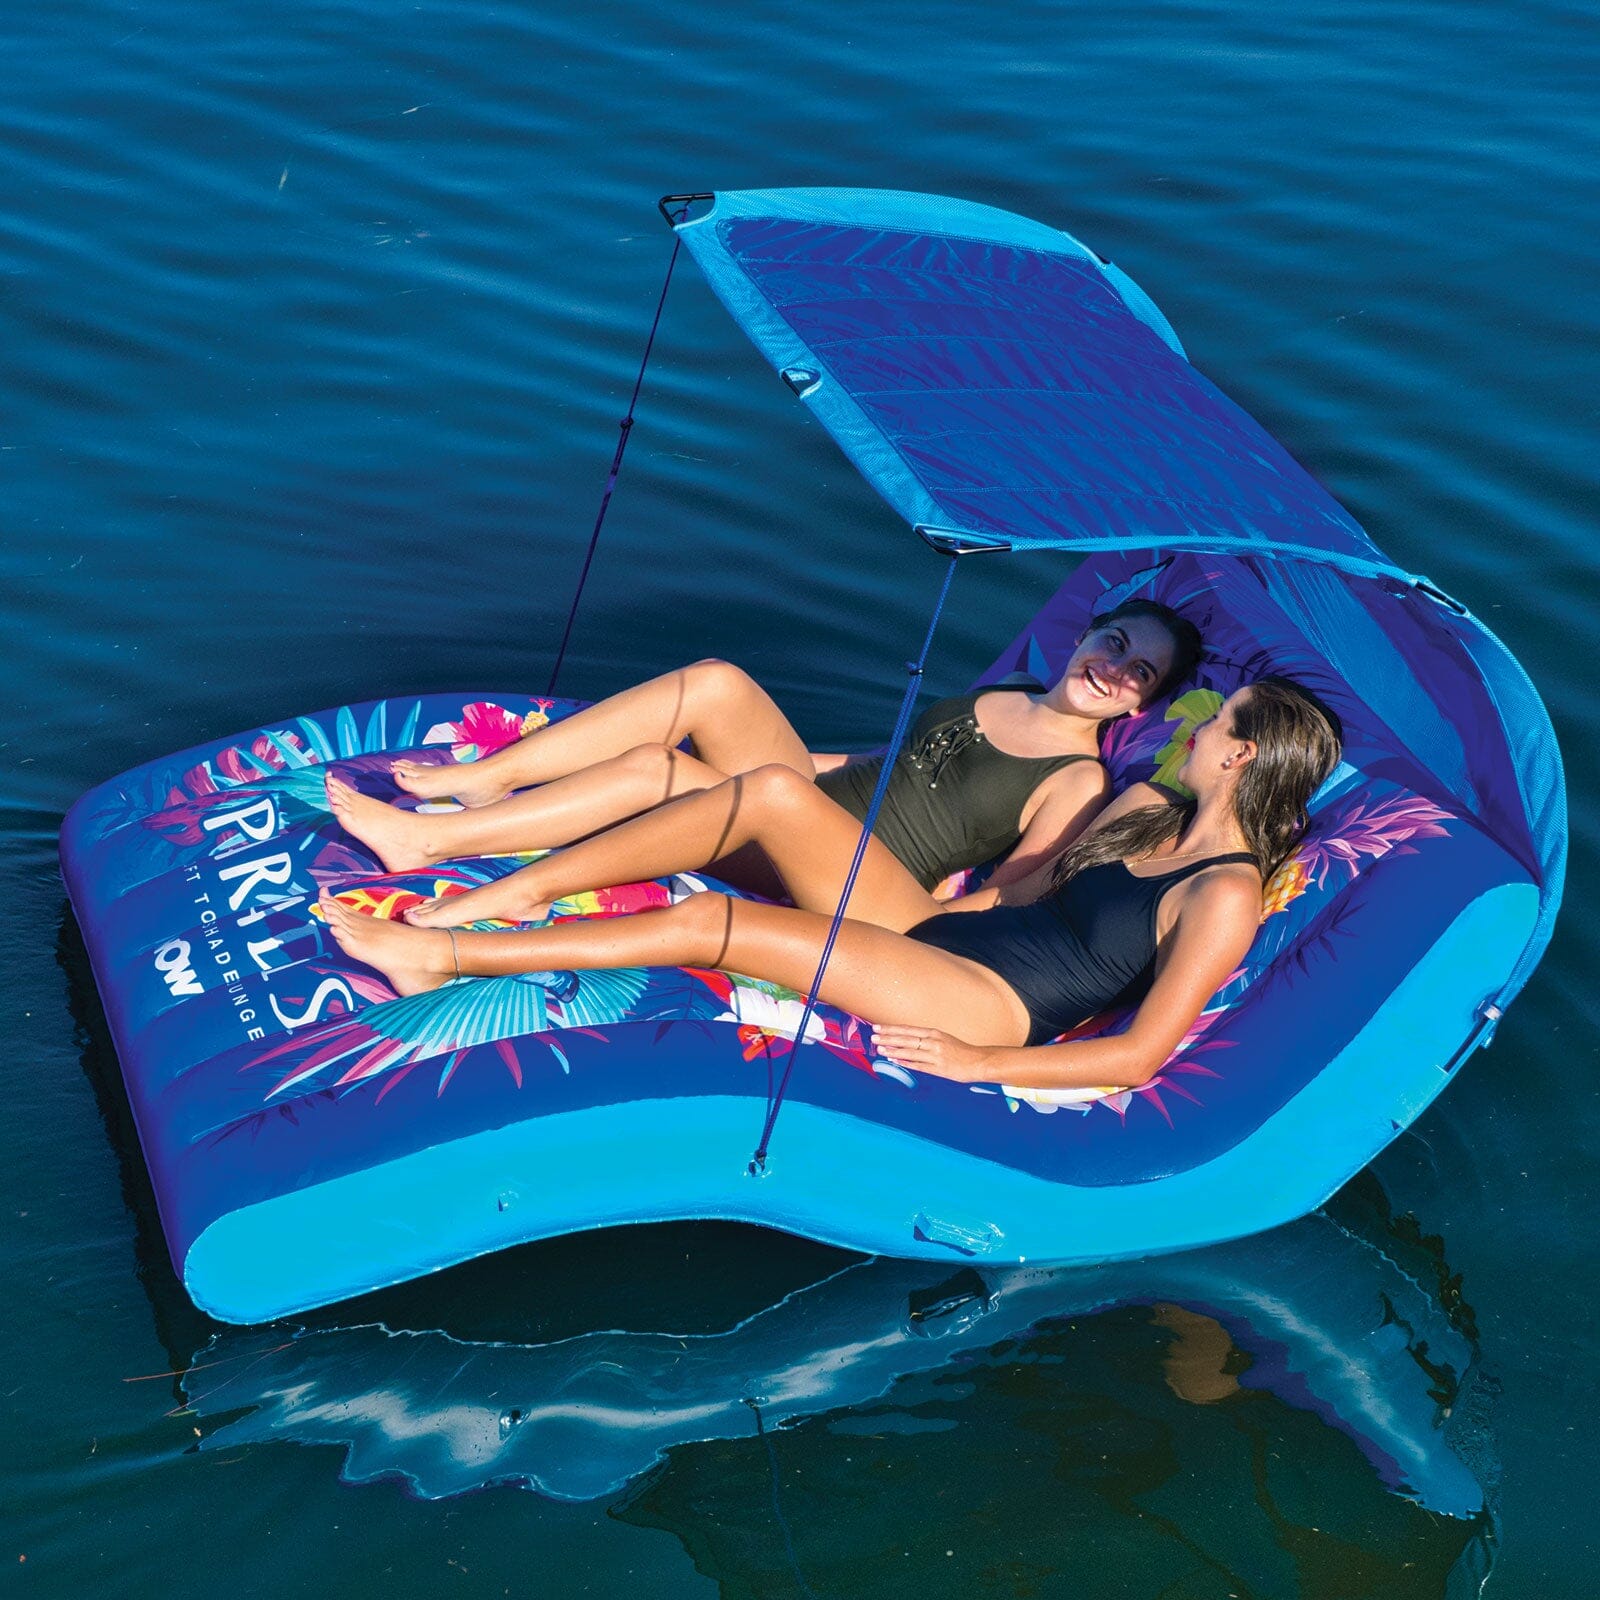 Best Pool Floats & Lounges for Adults - Pool Water Slide Tubes - WOW Sports